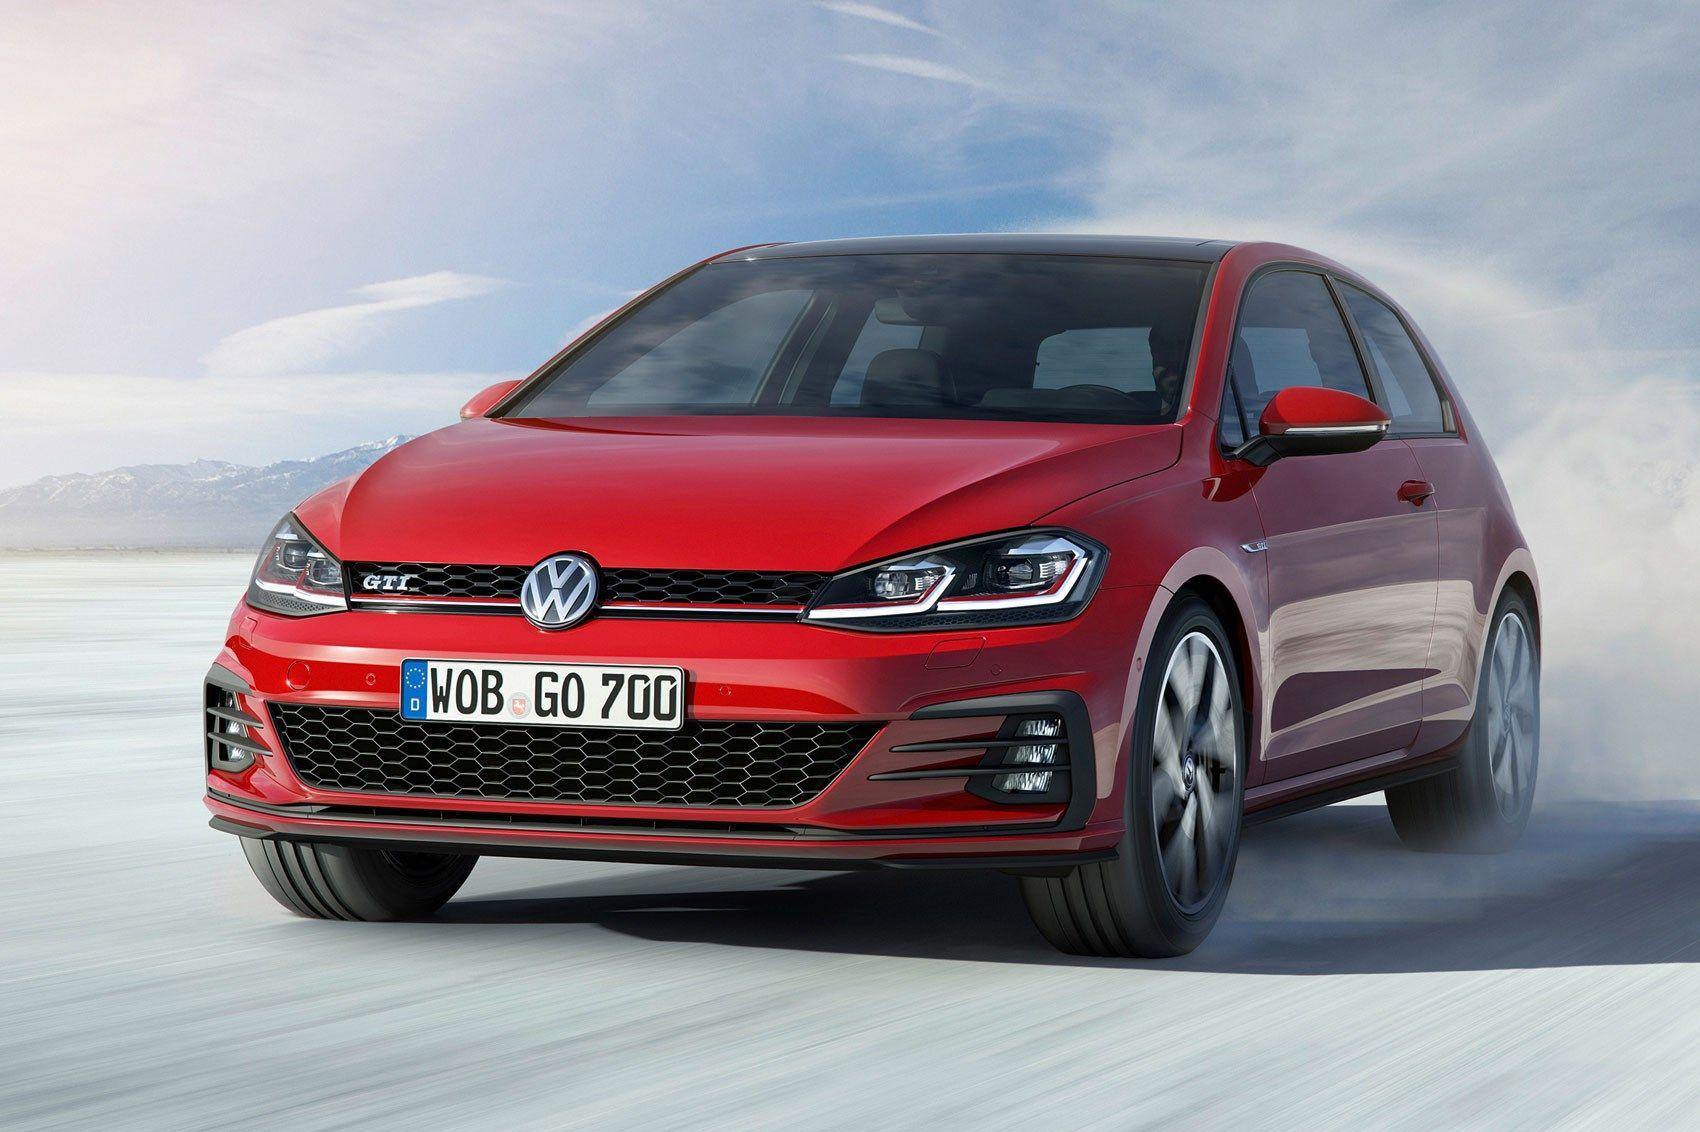 VW GTI LED Logo - Seven things you need to know about the facelifted 2017 VW Golf ...